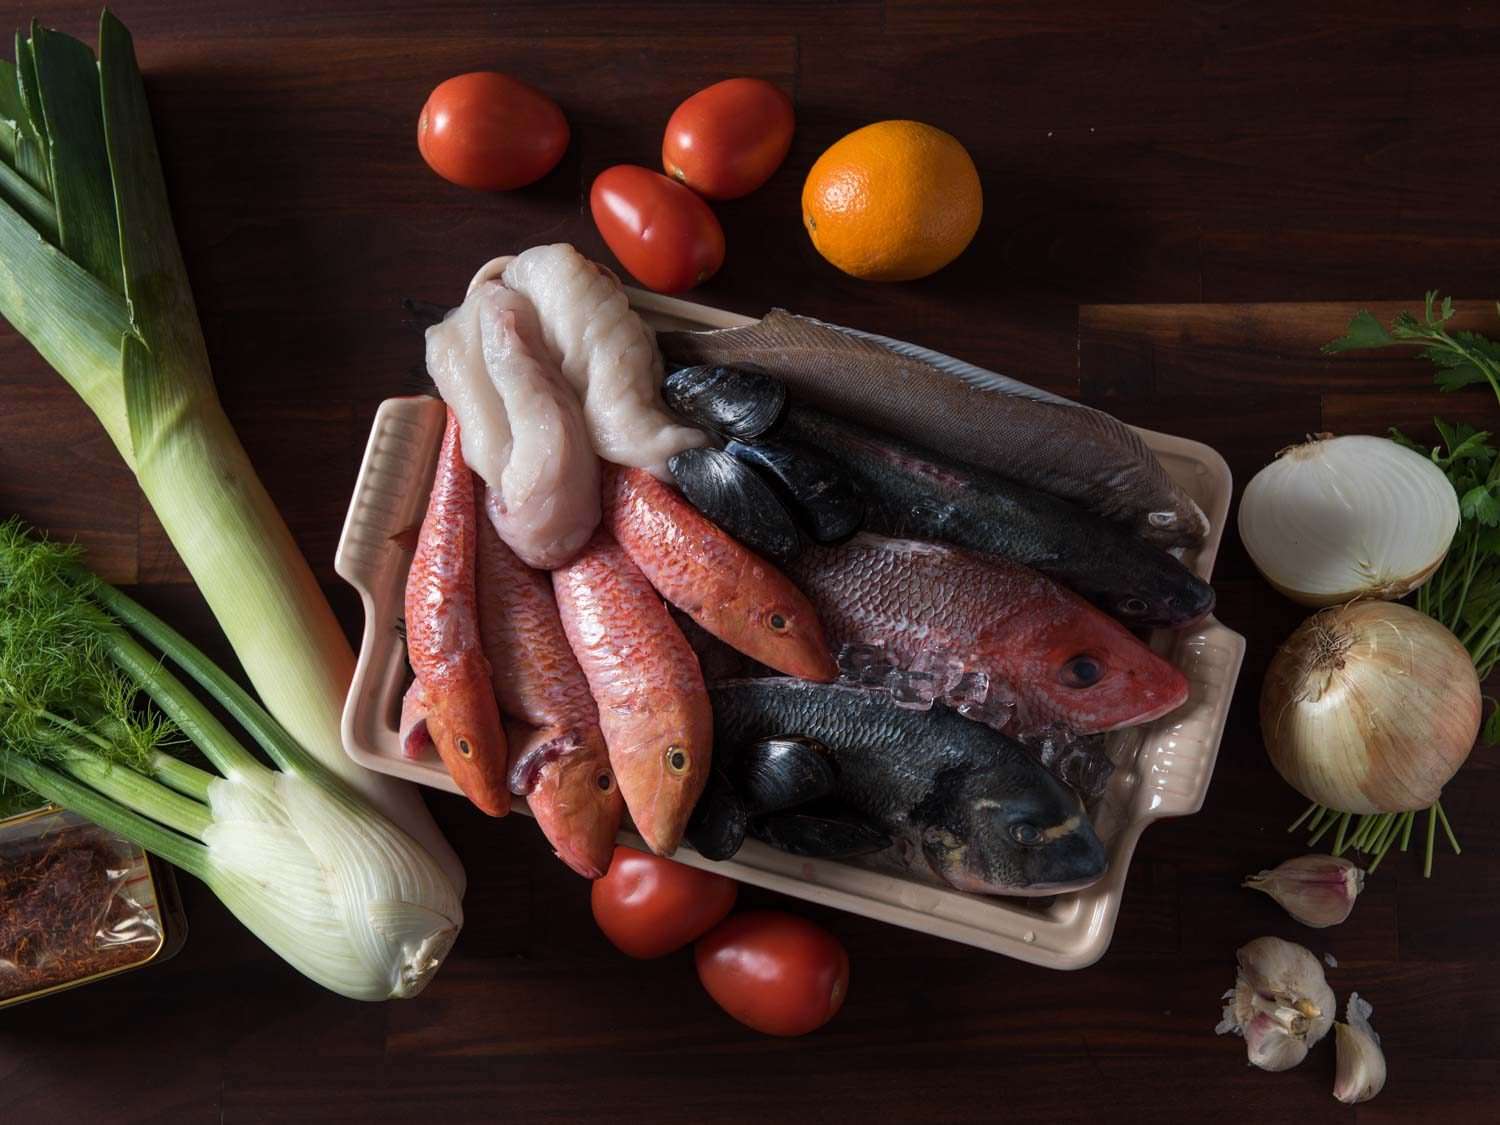 The ingredients used for bouillabaisse: mixed fish, fennel, onion, garlic, tomato, orange, saffron, and more.